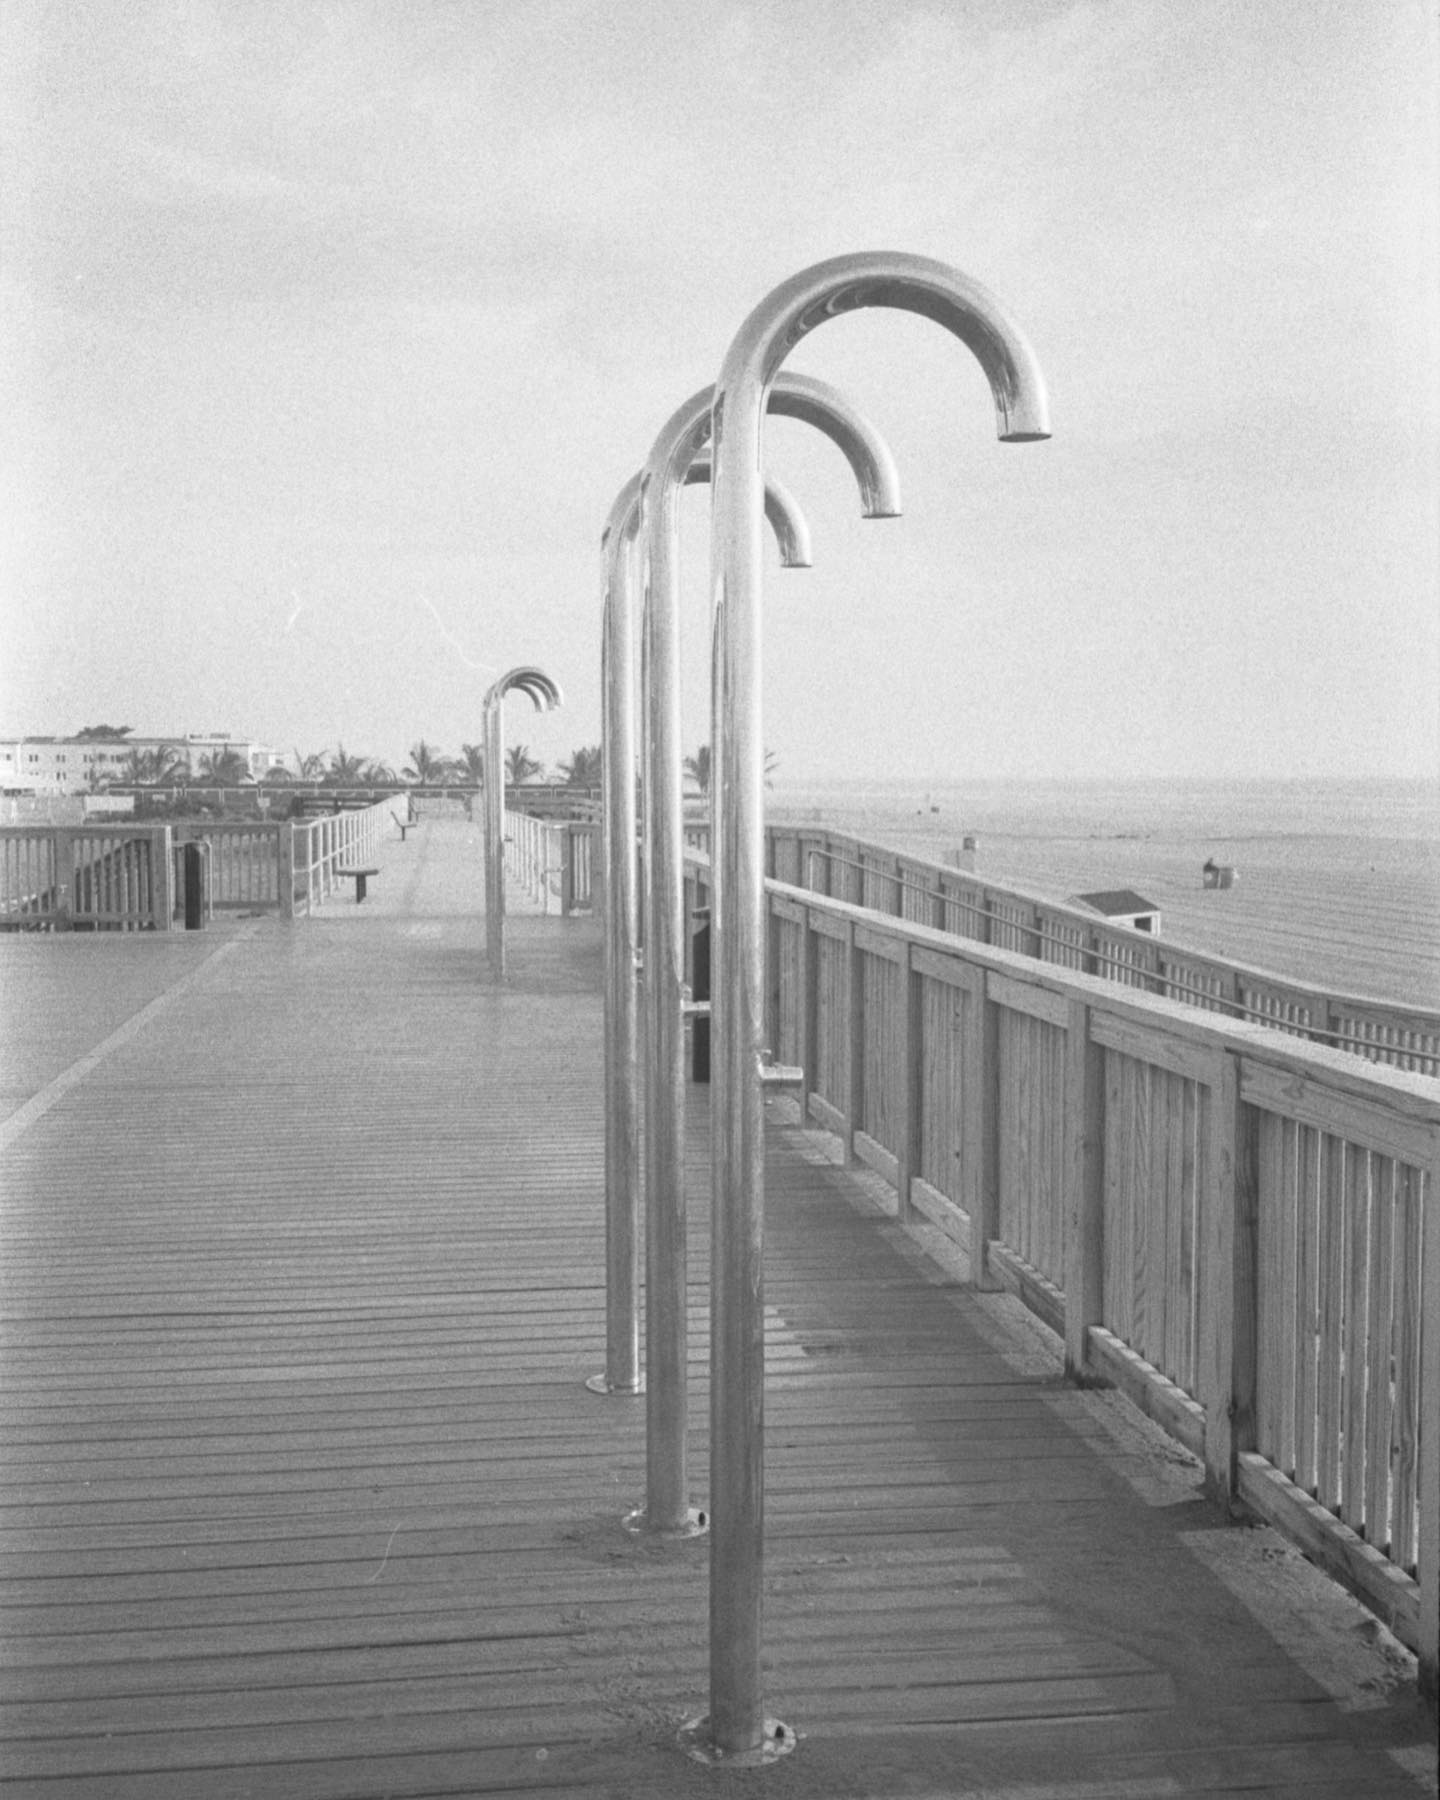 Showers

Sea Bright has rebuilt its entire shore front in the years since Sandy. These showers are a lot more impressive than the old ones. #film #filmphotography #filmphotographic #olympusxa #superxx #rodinal